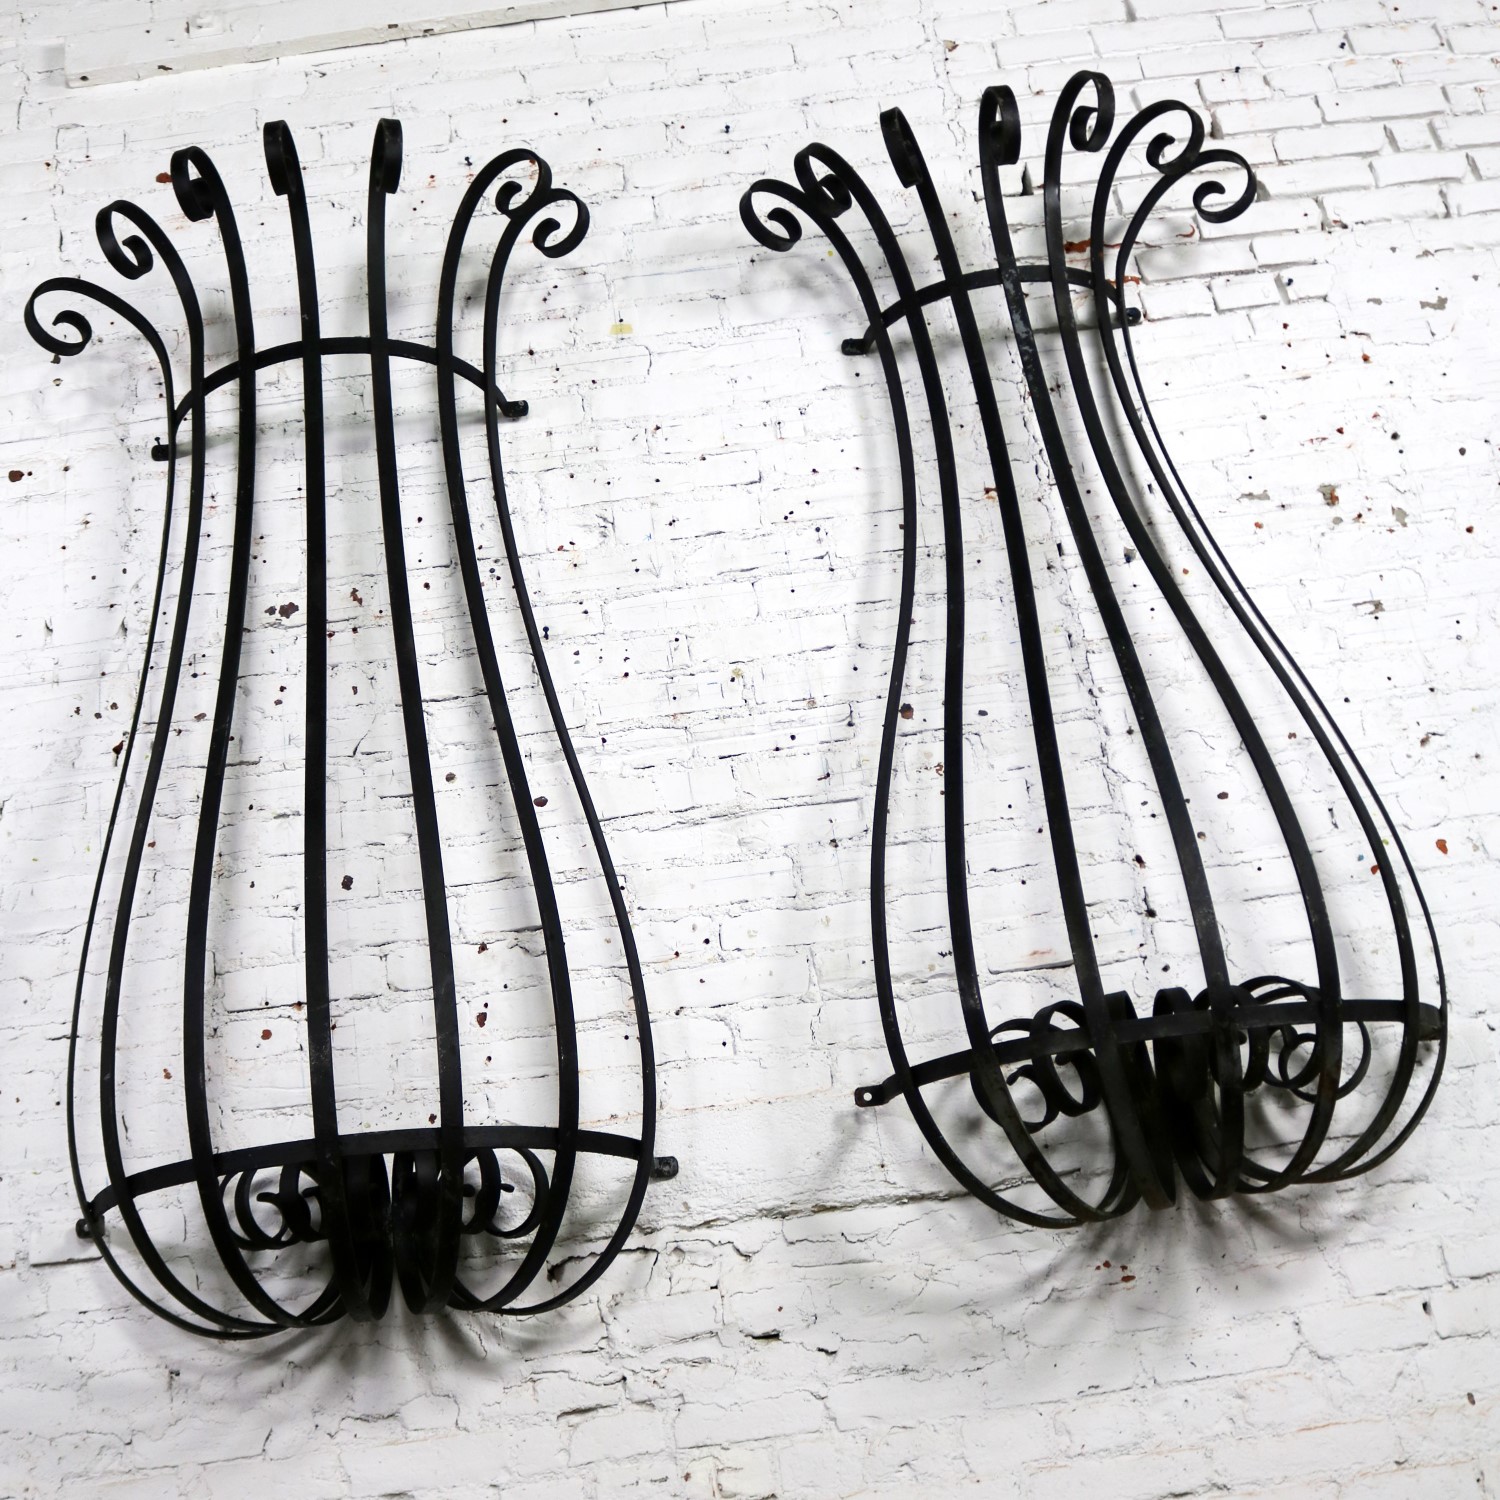 Architectural Antique Window Guards or Wall Urn Planters Hand Wrought Iron